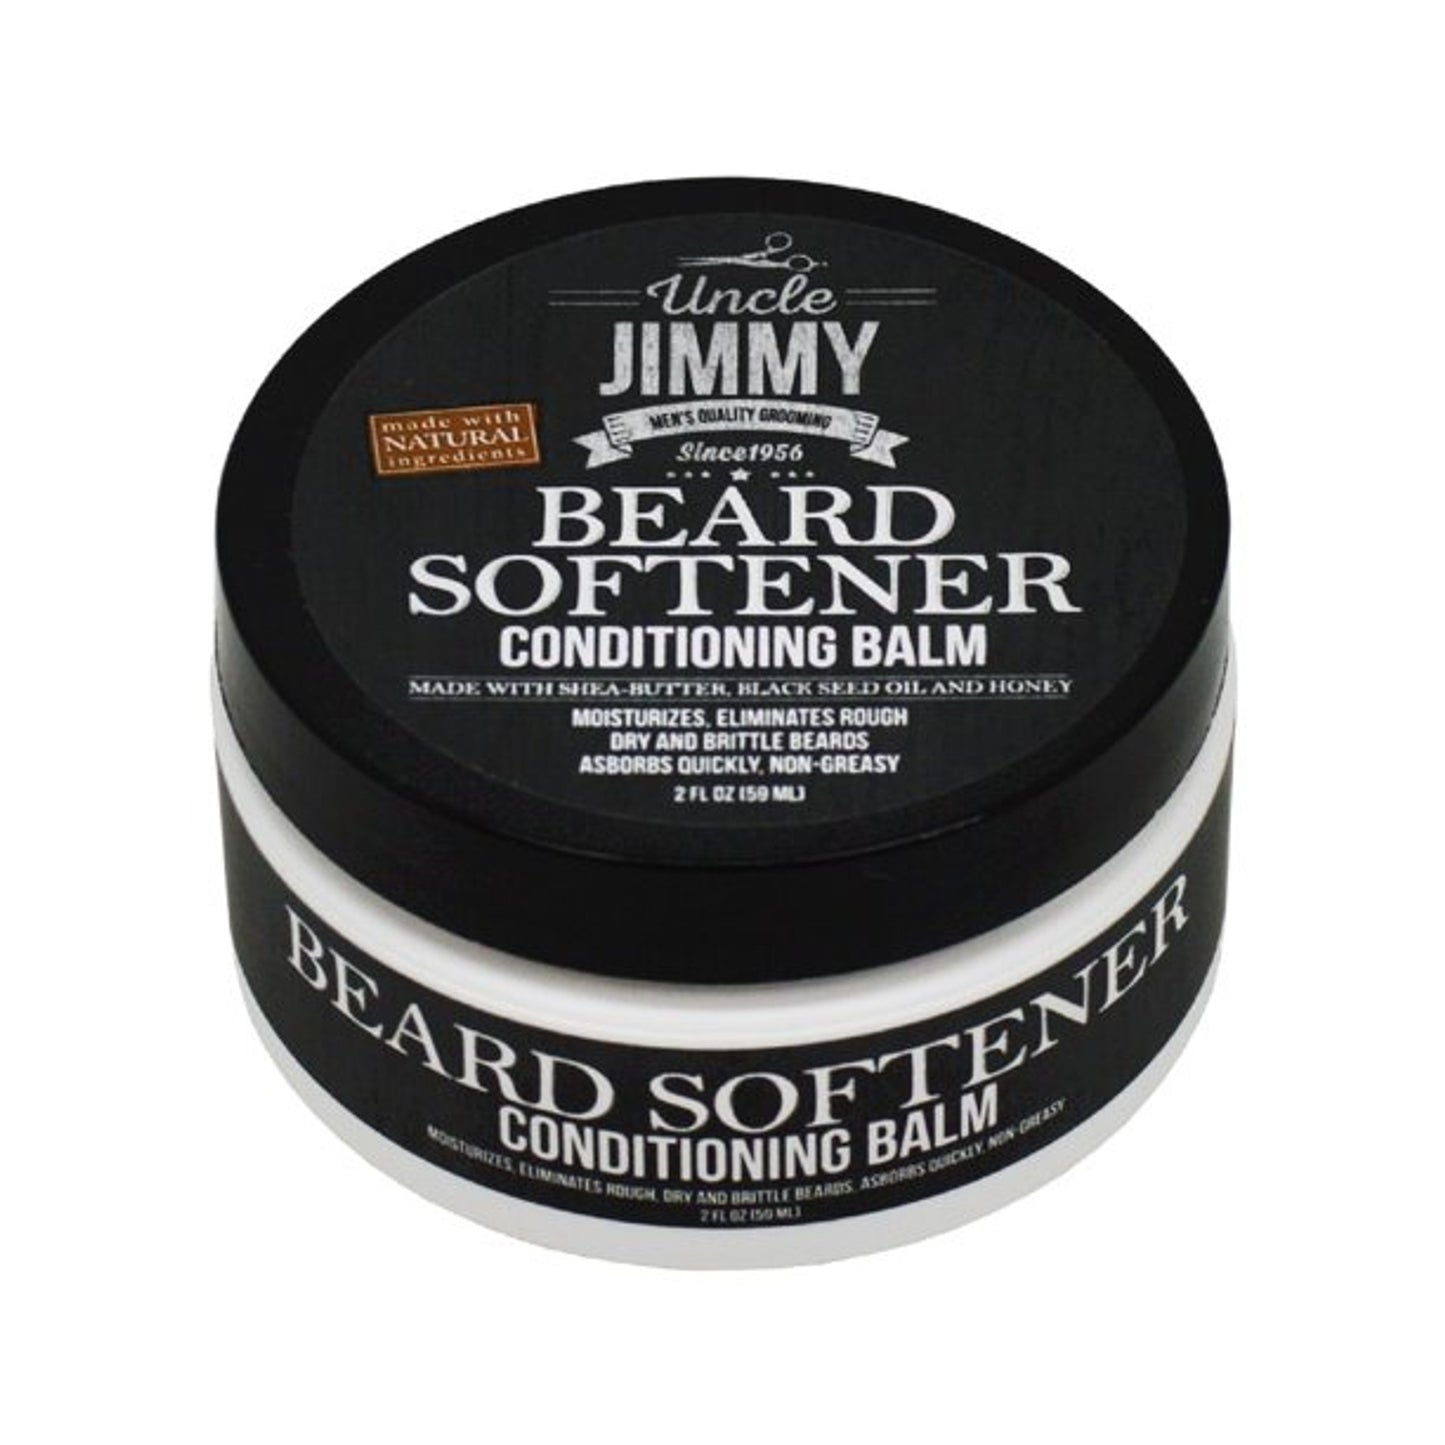 Uncle Jimmy Beard Softener Conditioning Balm - 2oz